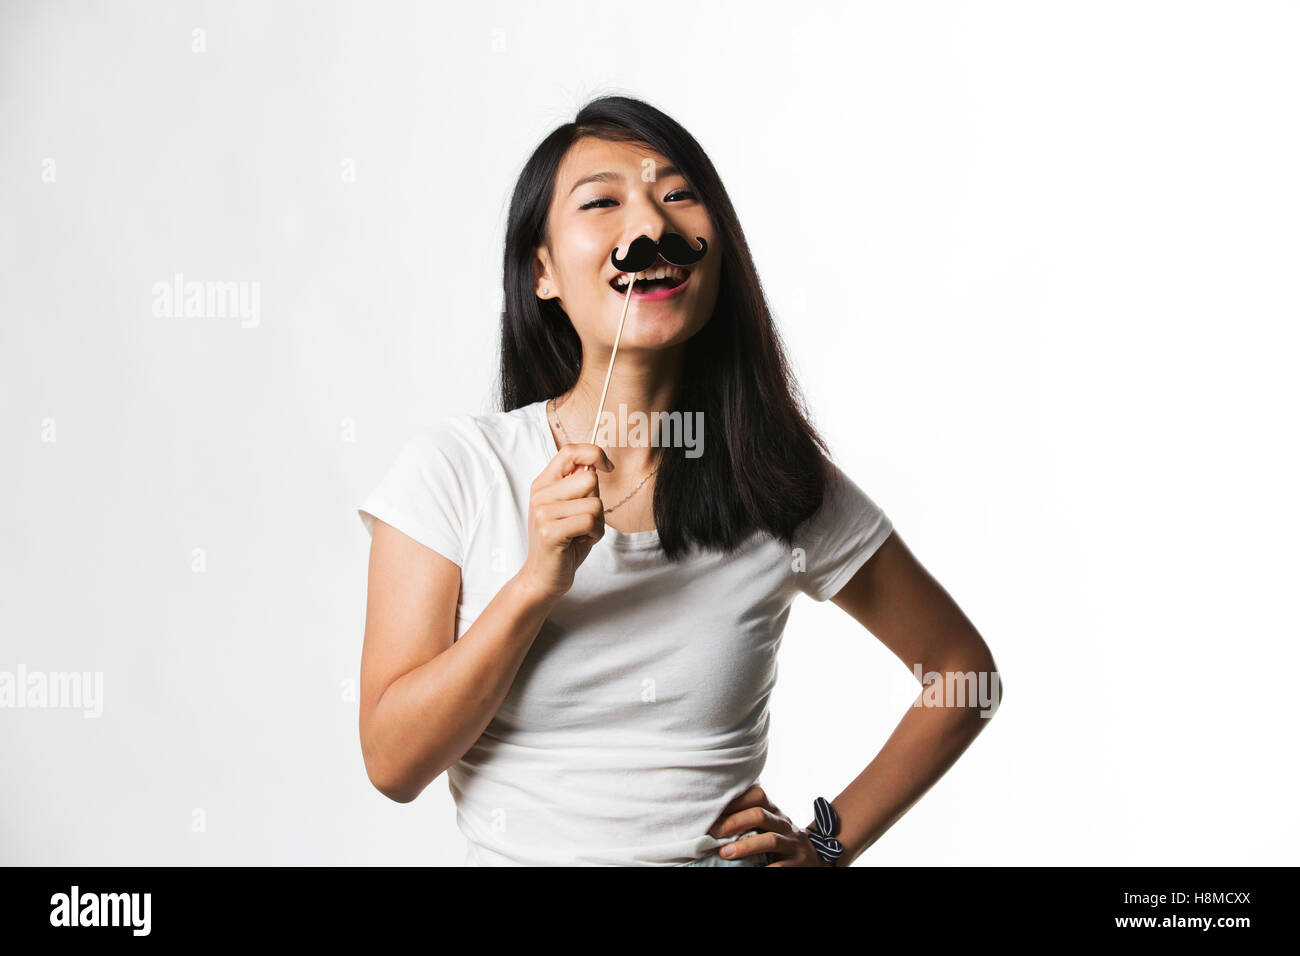 Chinese woman having fun with a fake mustache Stock Photo